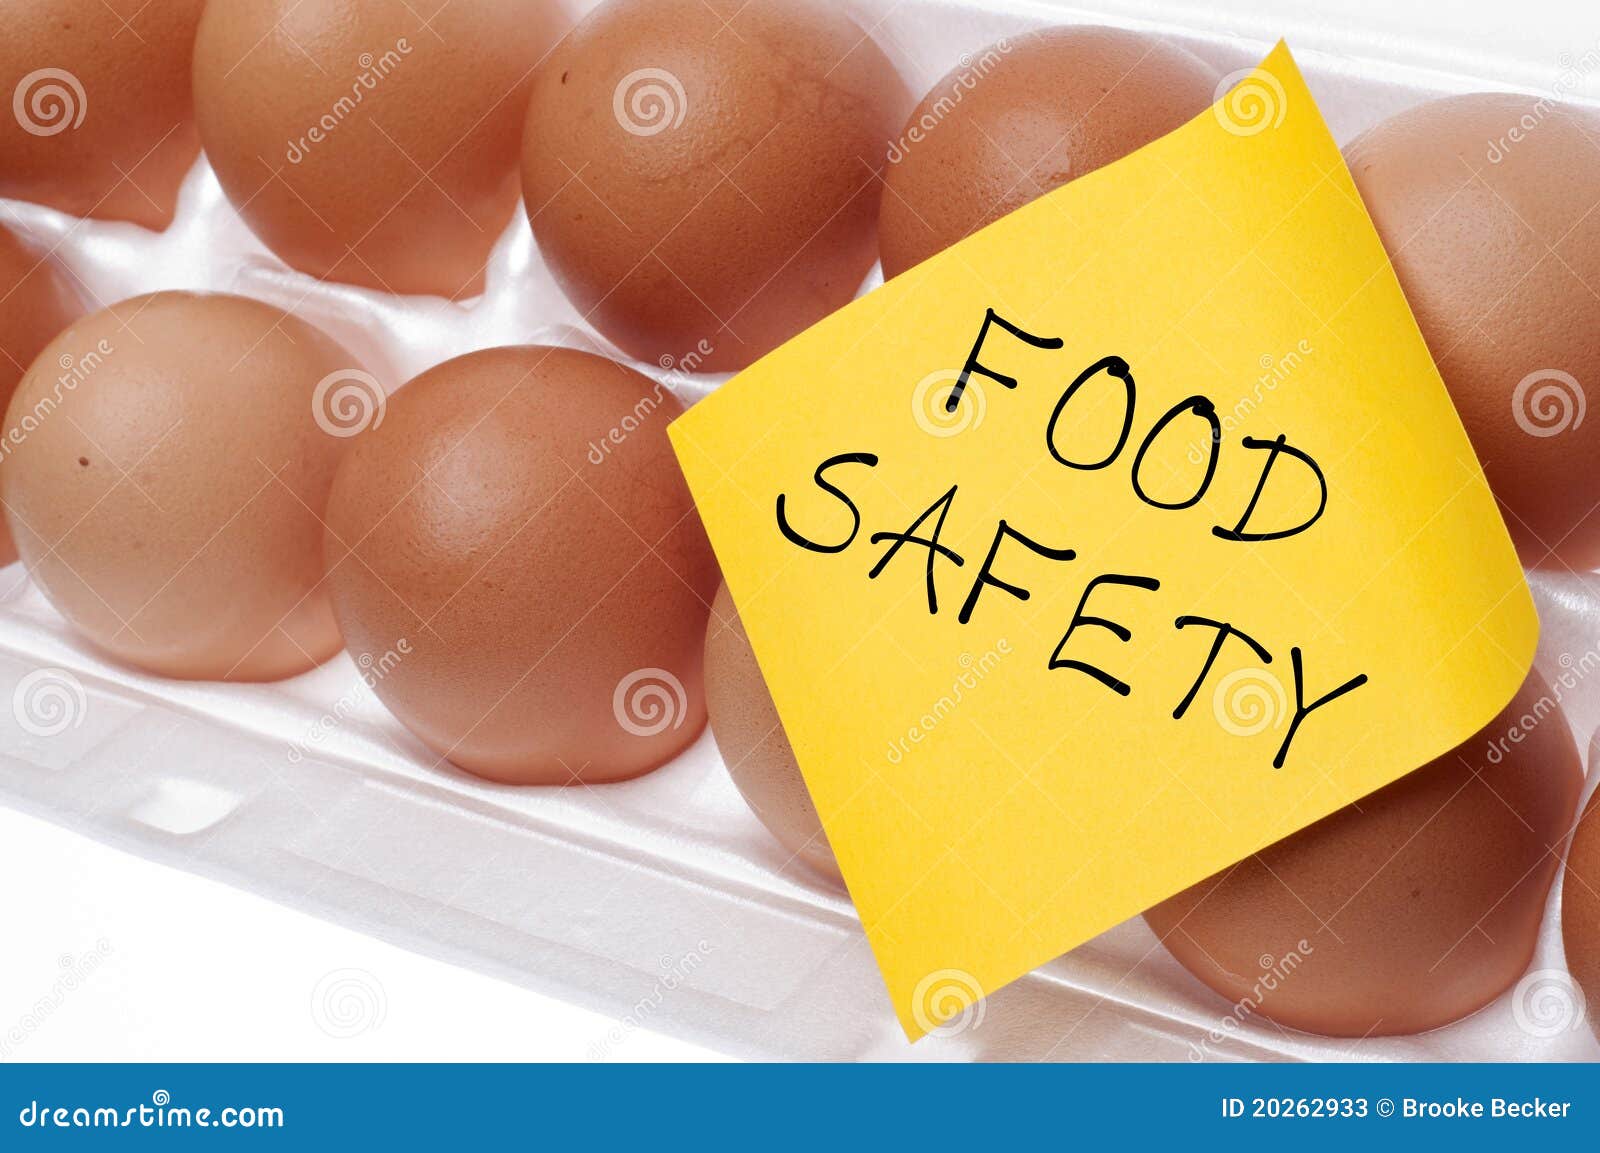 food safety concept